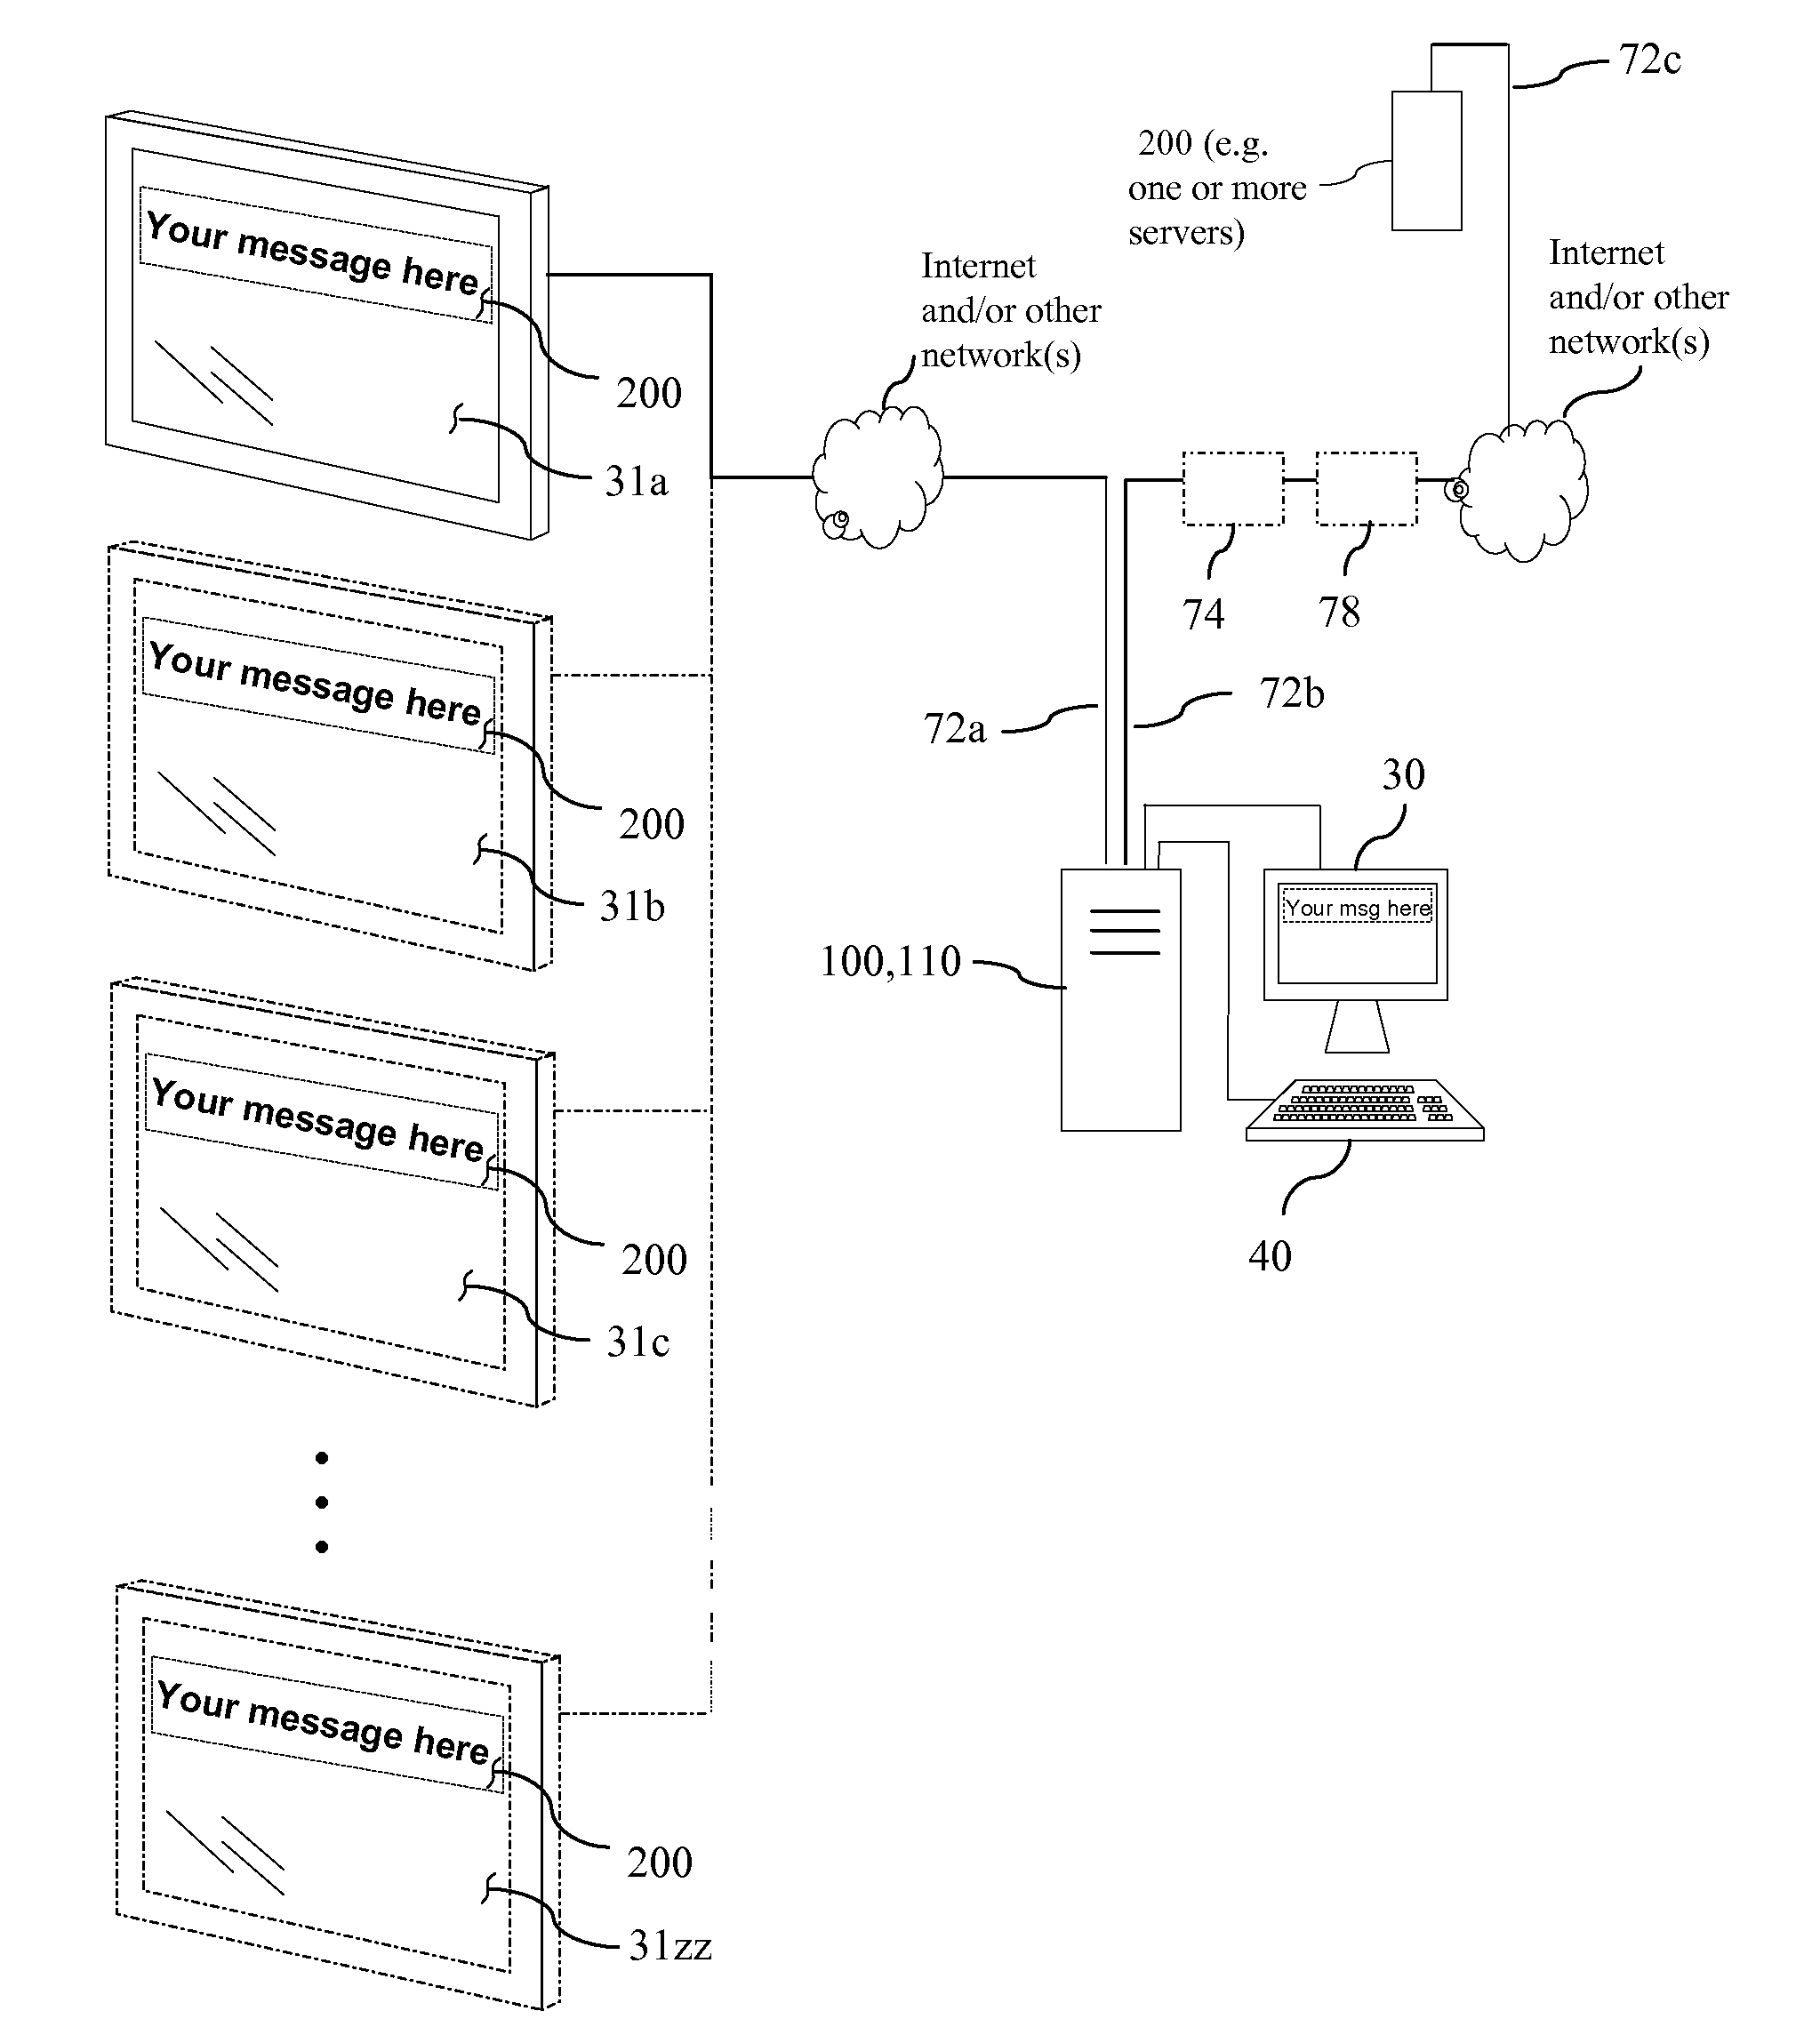 Method and System of Creating Media Playlists and Sending to Mobile Devices